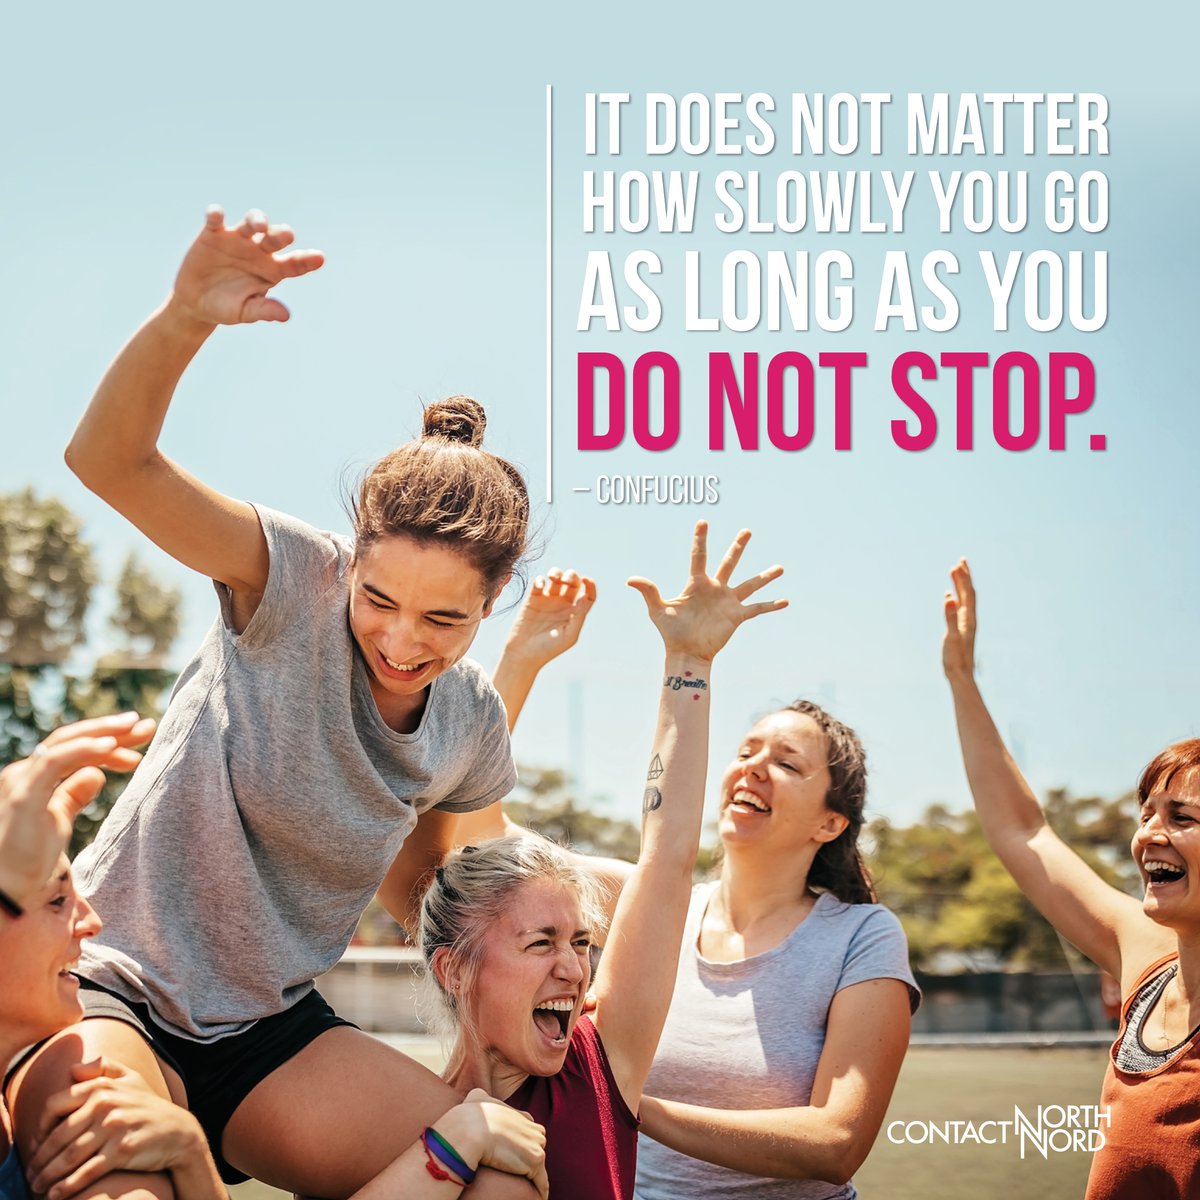 It does not matter how slowly you go as long as you do not stop. - Confucius 🛤️👣 In the journey of education, every step counts. Contact North supports your steady progress towards achieving your goals. Let’s embrace the journey together! 📘💪 #LifelongLearning